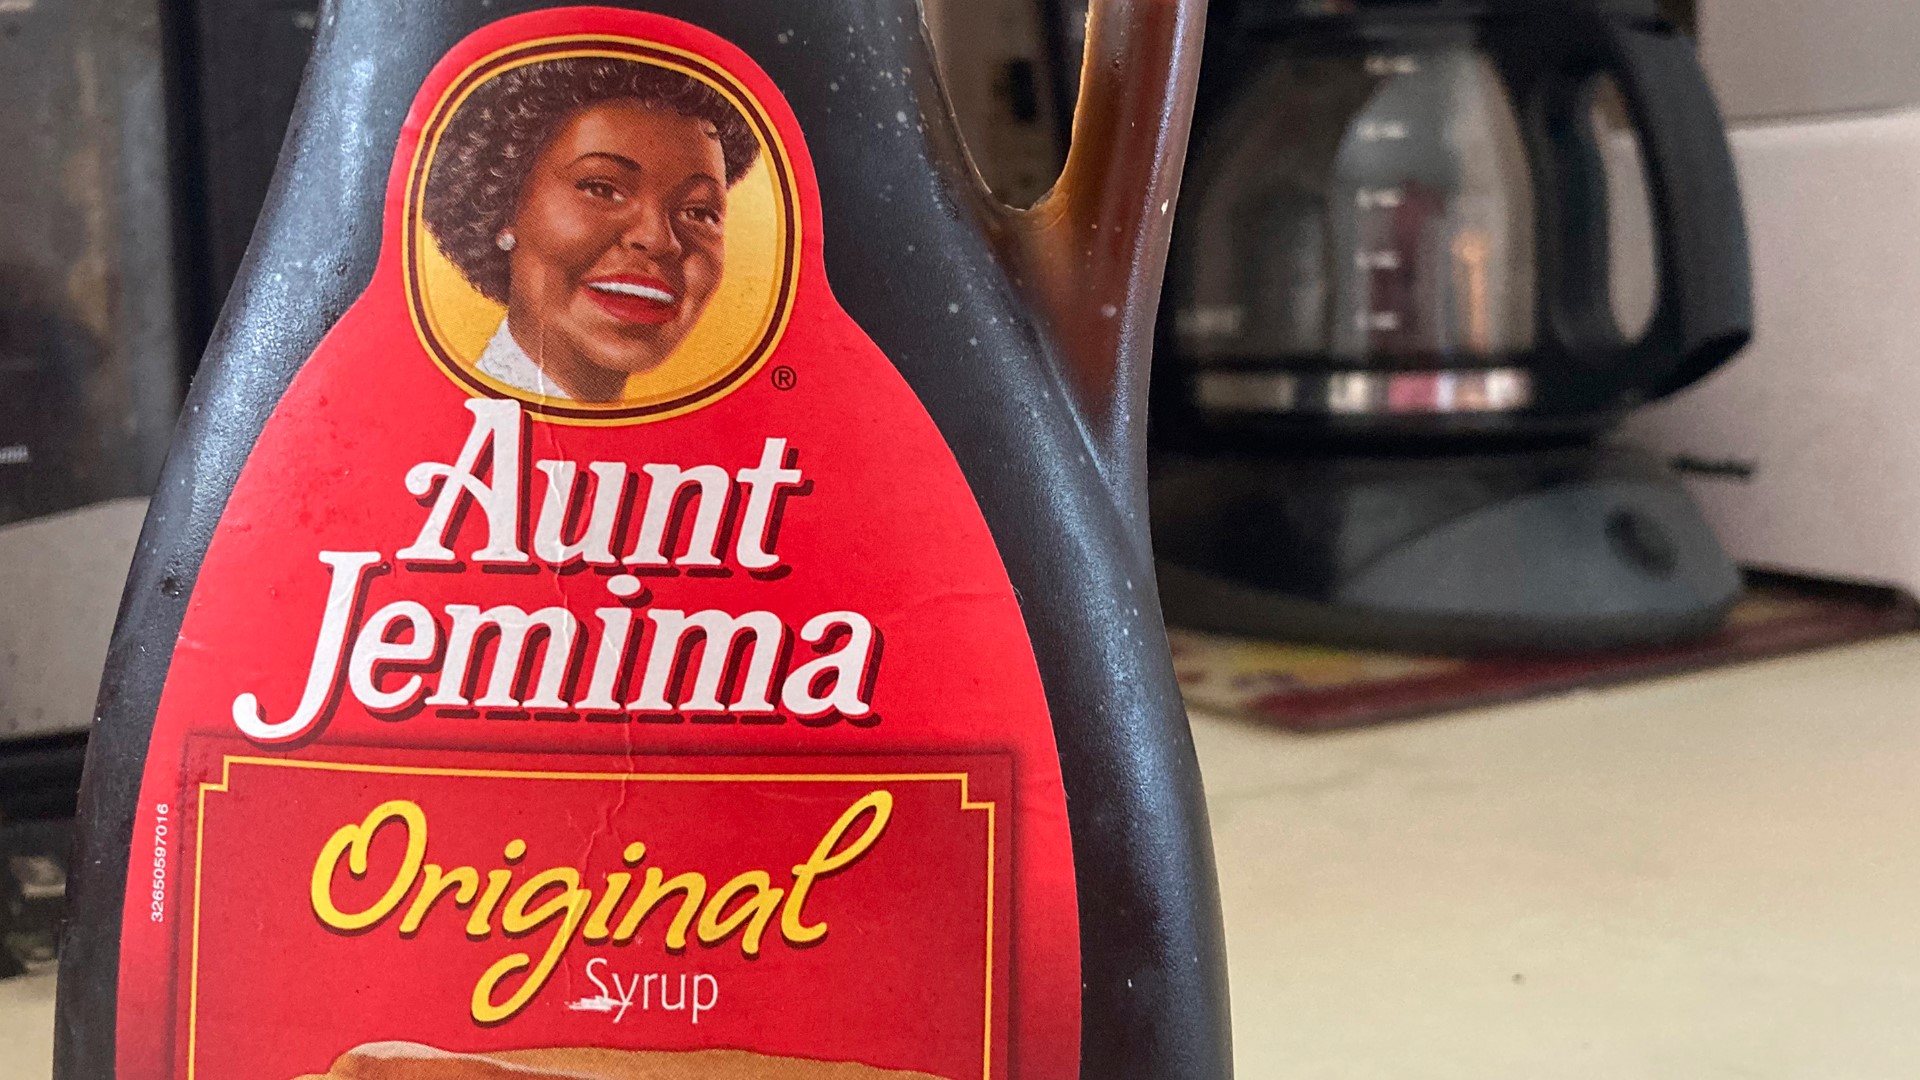 Aunt Jemima syrup will get a new name and image. Quaker Oats Company told AdWeek that it recognized Aunt Jemima's origins are based on a racial stereotype.